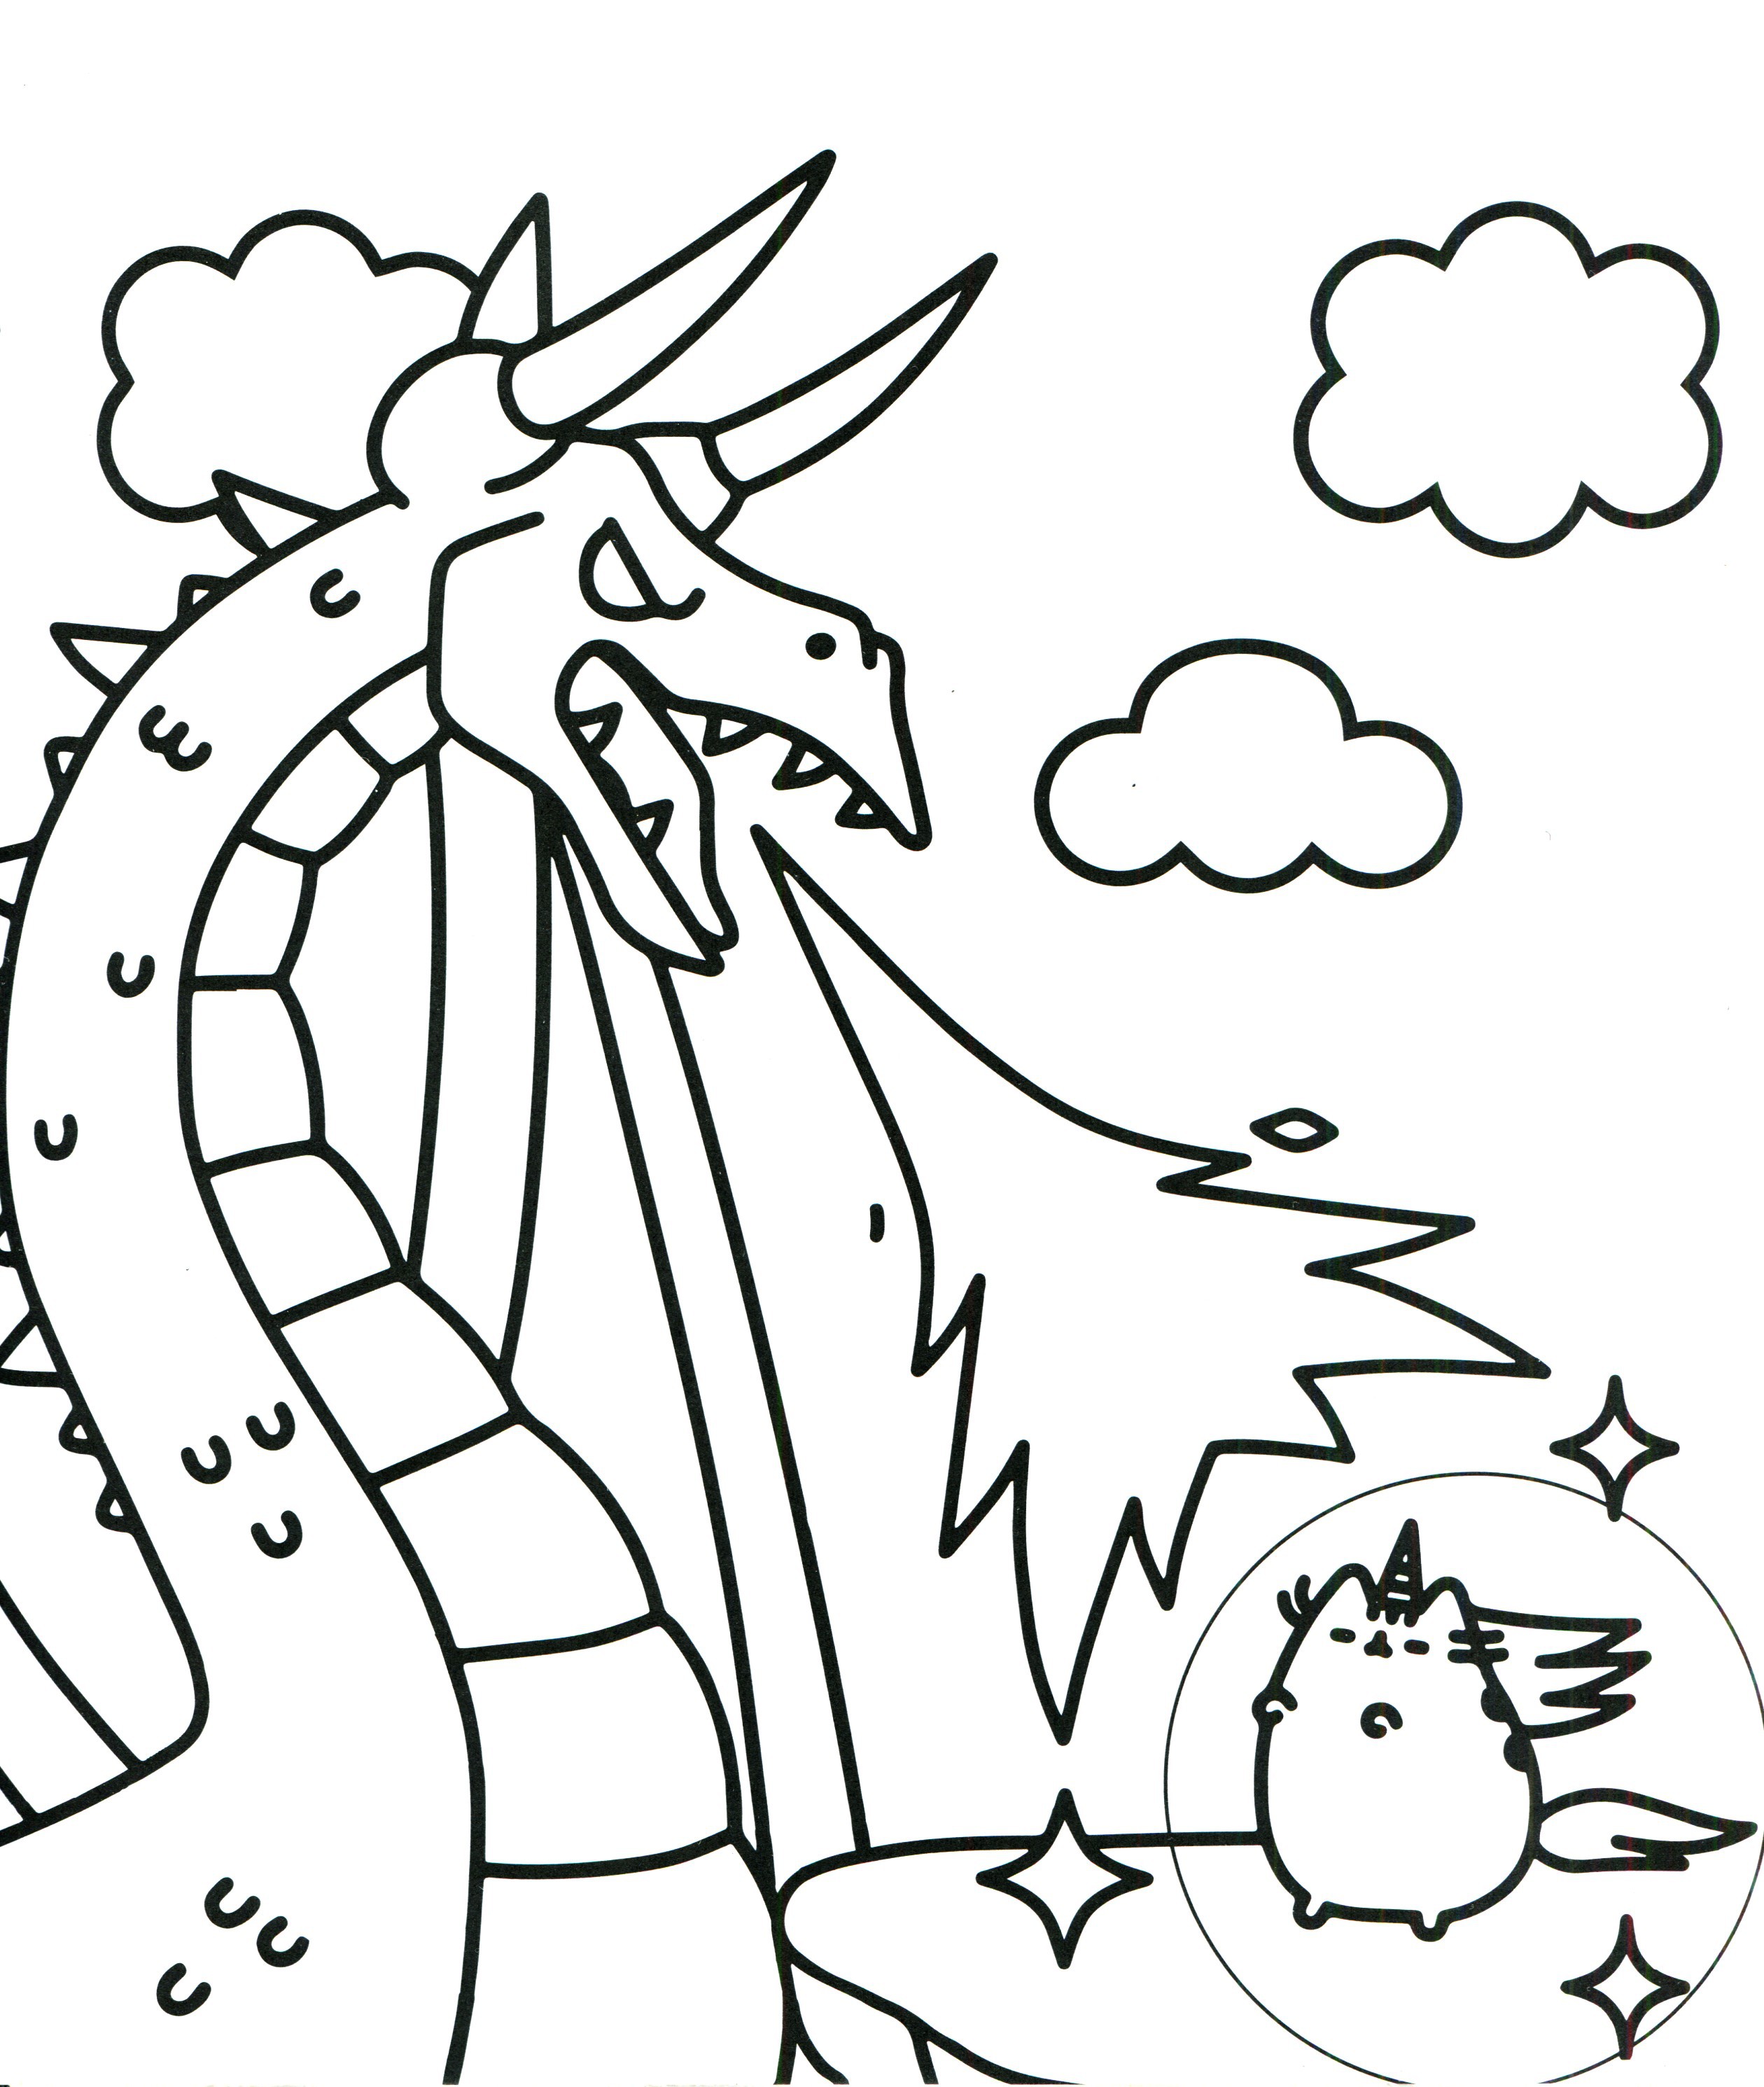 Kawaii Coloring Pages Free New Extraordinary In Unicorn Coloring Page with Hd Pages Free Valid Pusheen